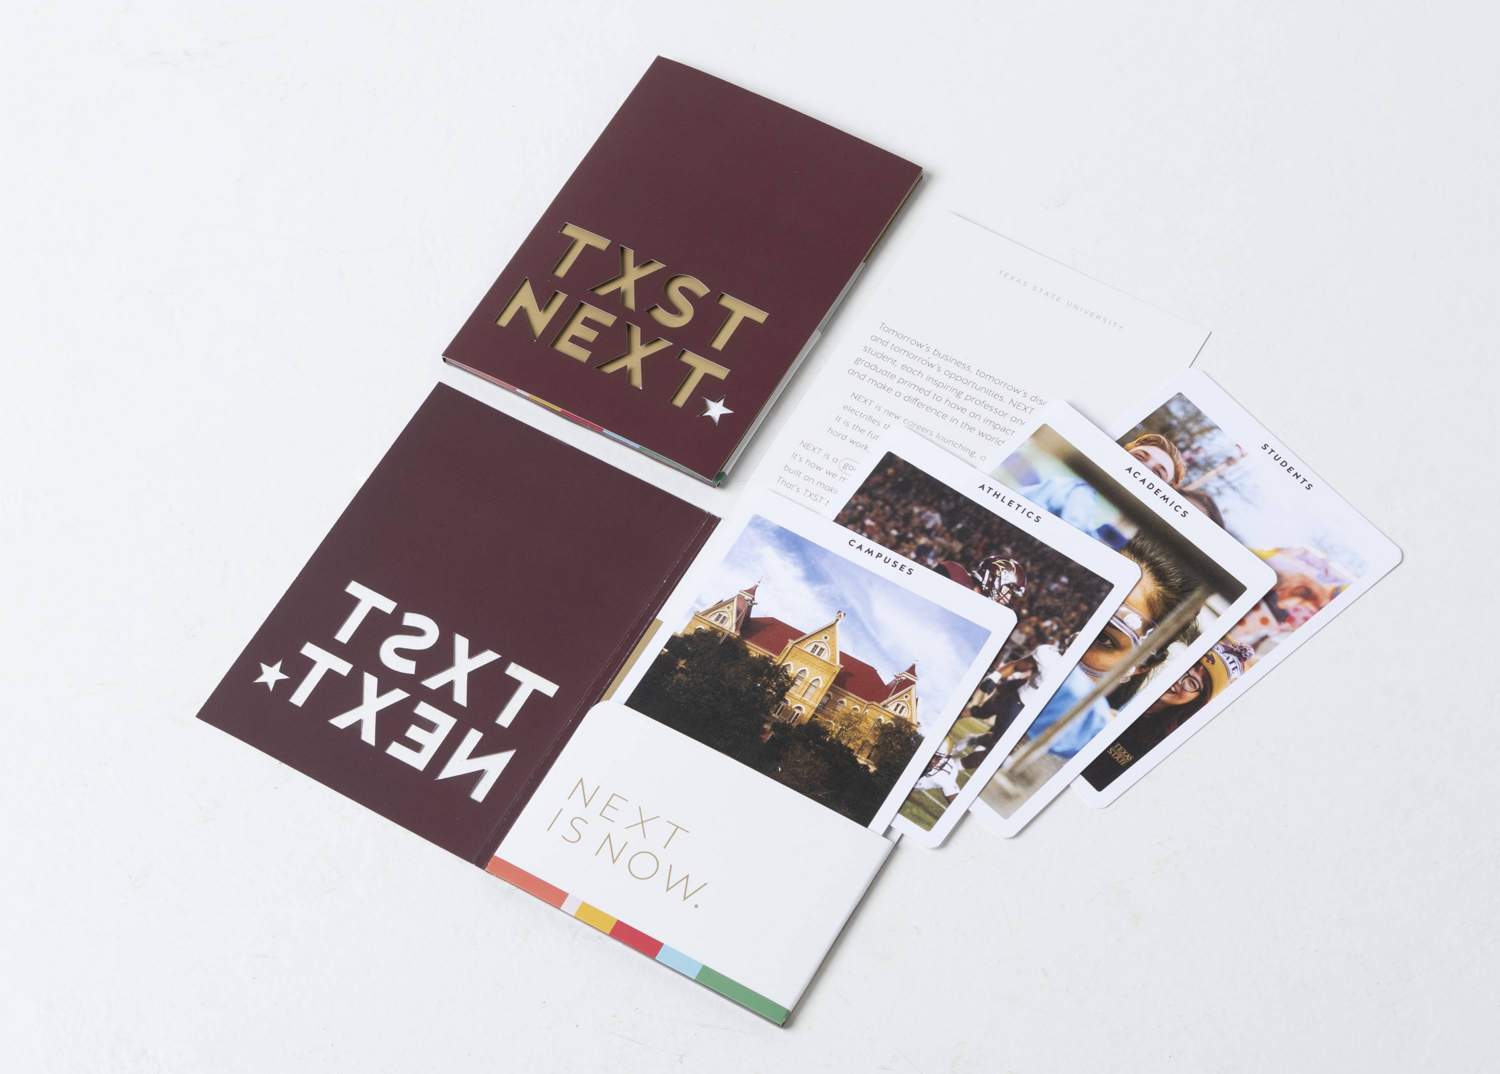 Materials from the Next Is Now campaign use elements like colors, photography, and typography that are rooted in TXST Next’s design.